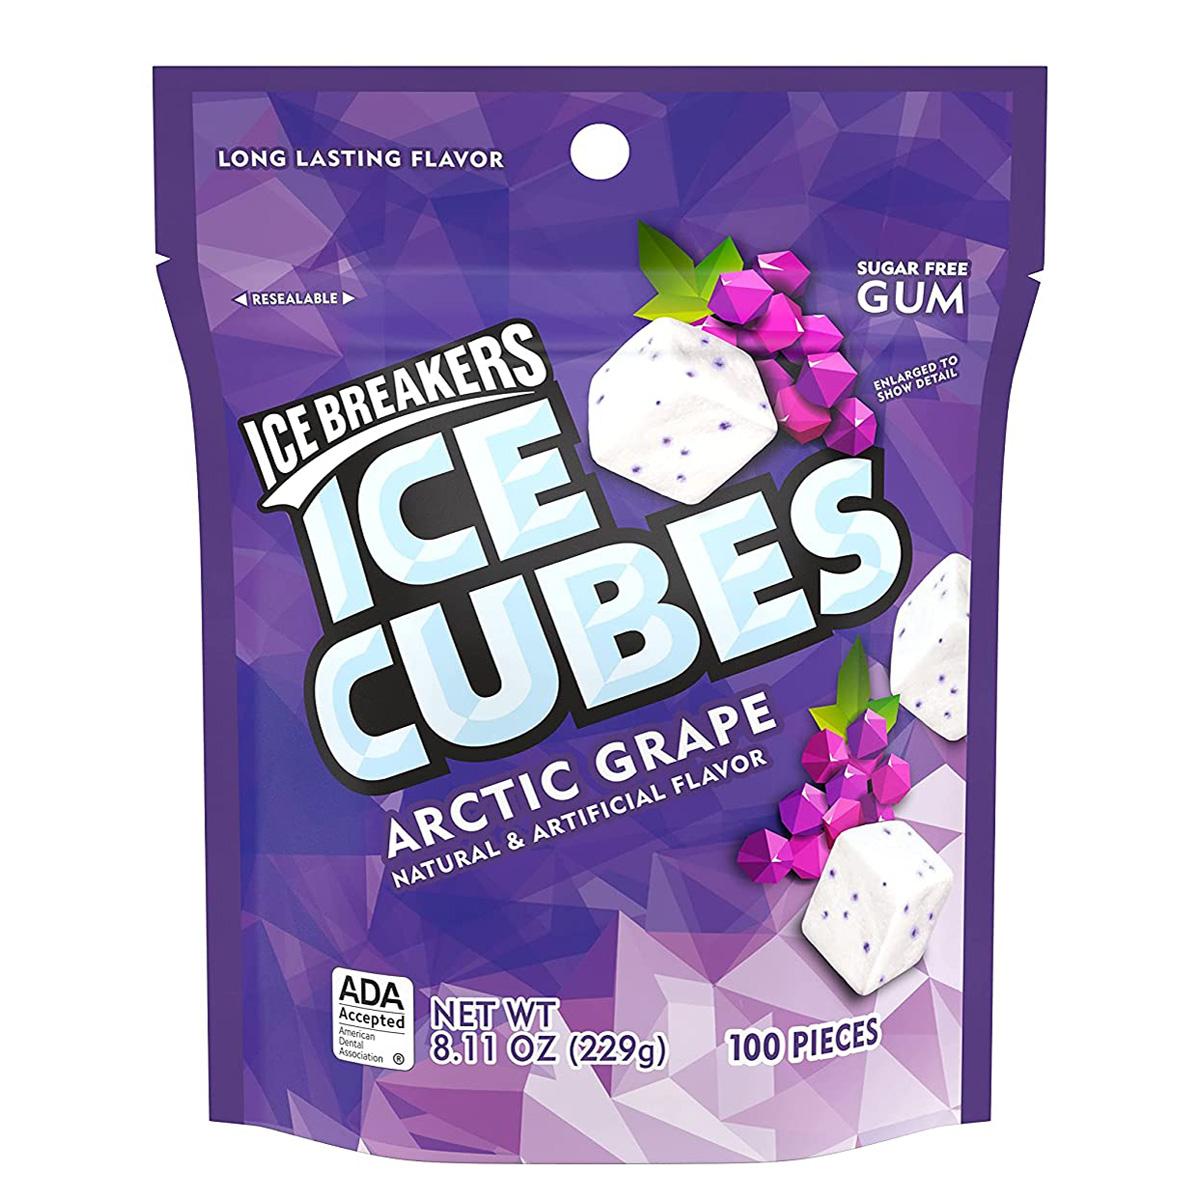 100 Ice Breakers Ice Cubes Gum for $4.99 Shipped